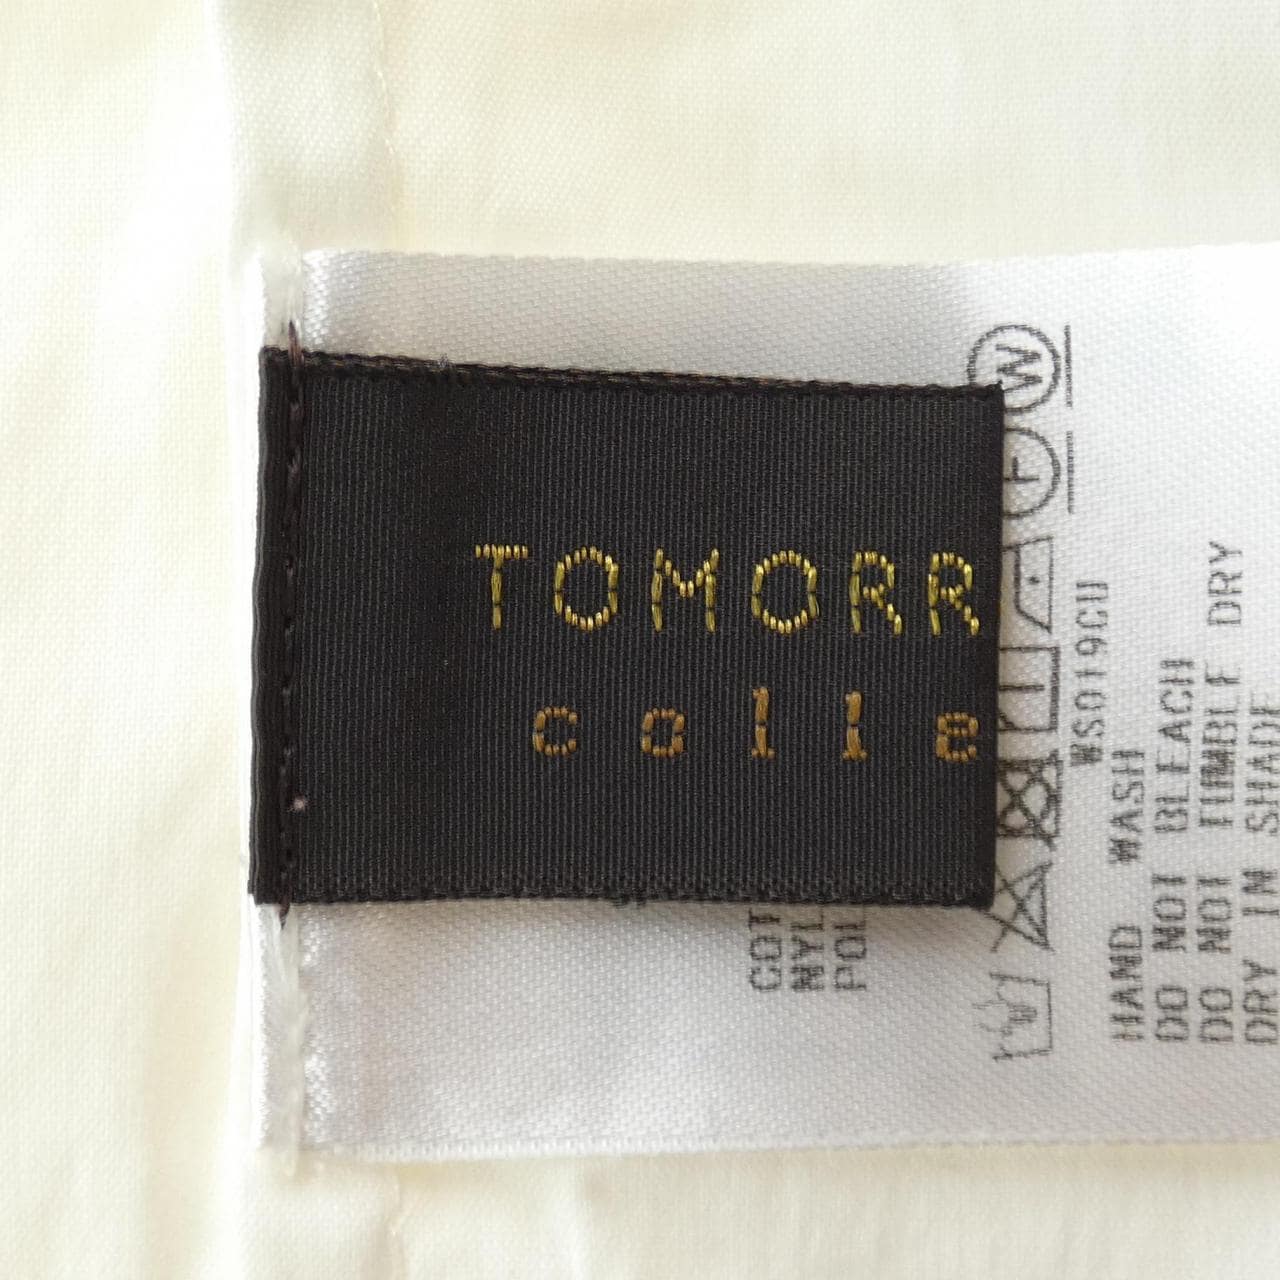 Tomorrowland Collection TOMORROW LAND COLLEC Tops